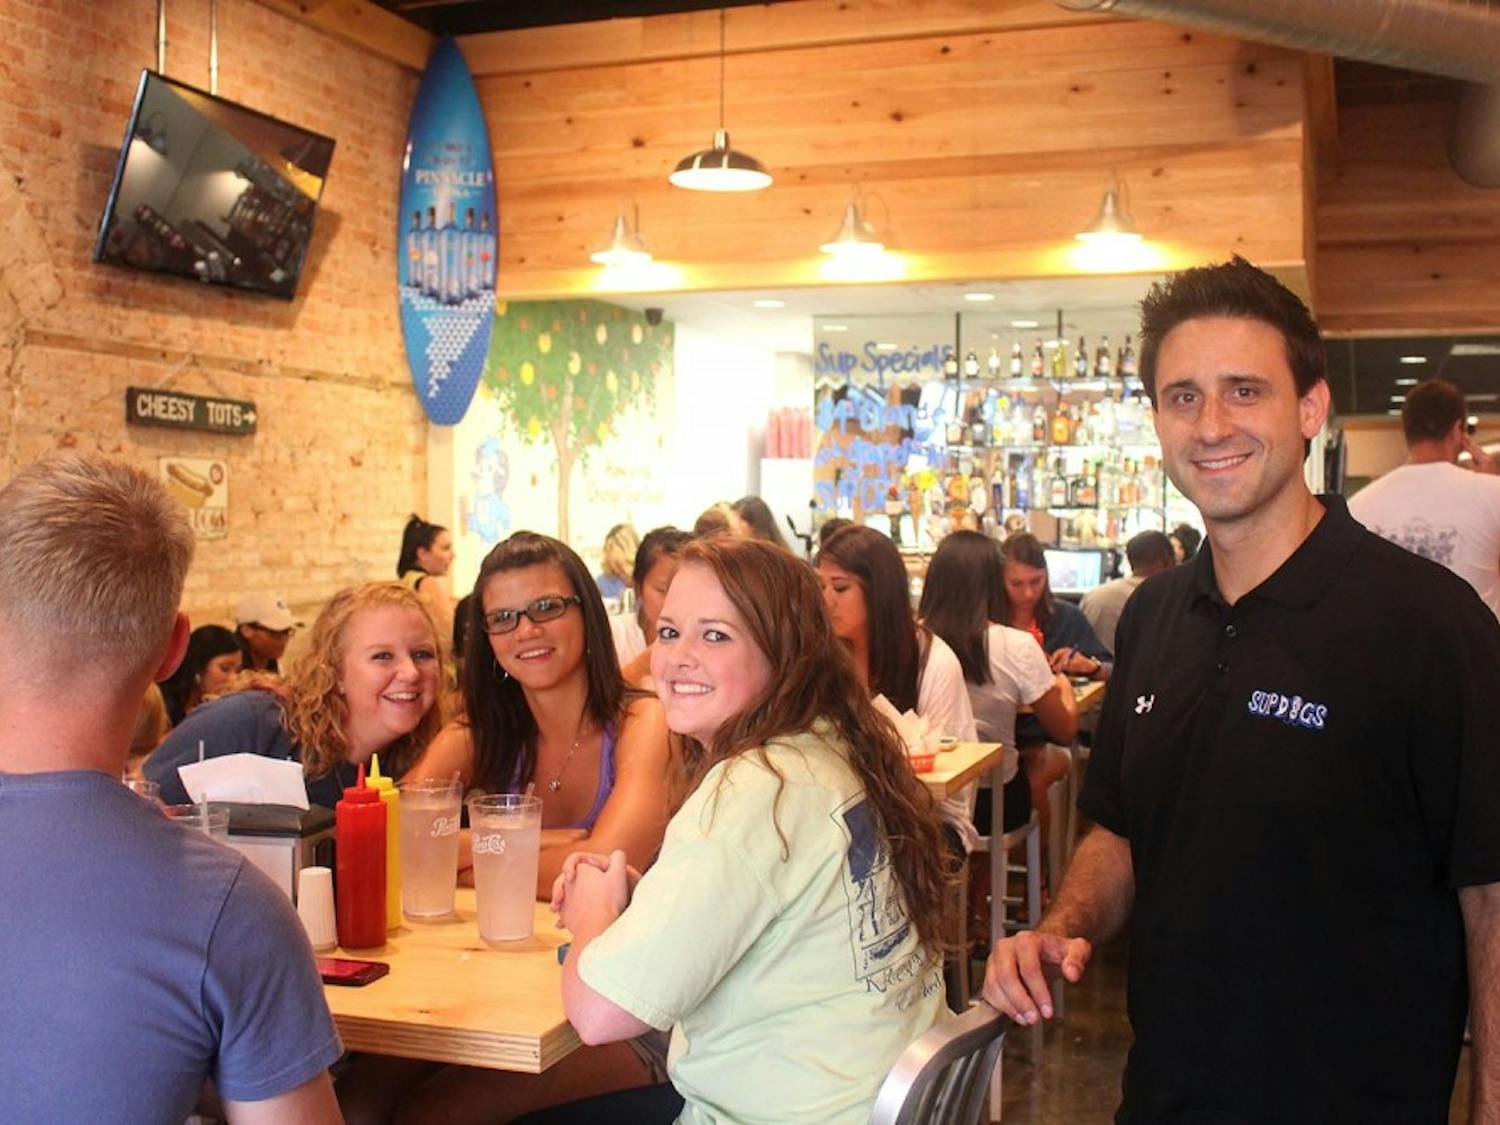 When&nbsp;Sup Dogs on Franklin Street opened, owner Bret Oliverio welcomed new patrons as they came in the door.